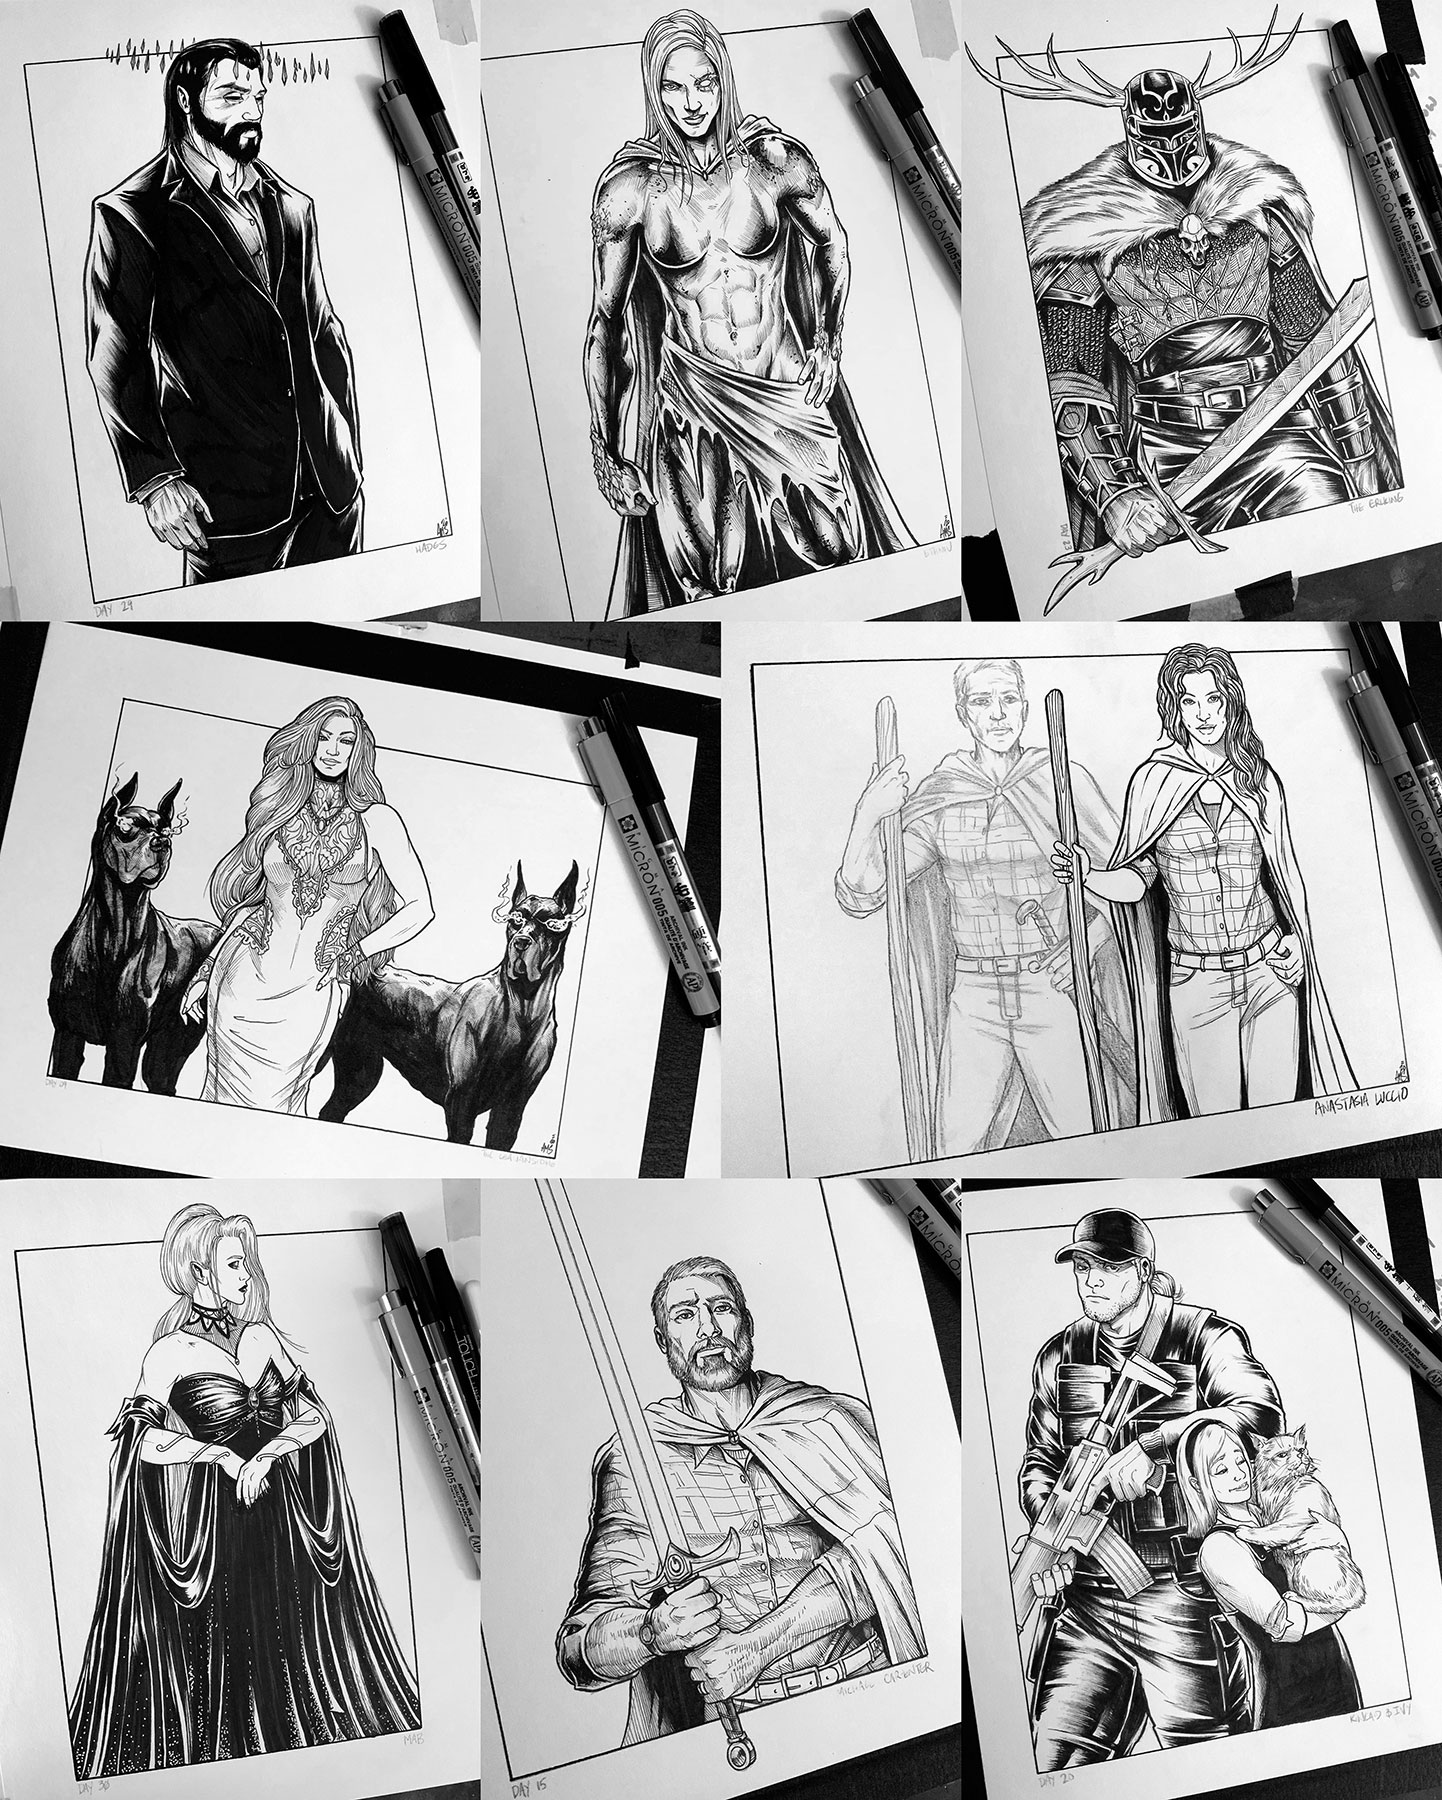 Collage of Adam Mathison-Sward illustrations for Inktober: Hades, Ethniu, the Erlking, Lea, Luccio, Mab, Michael, and Kincaid and Ivy